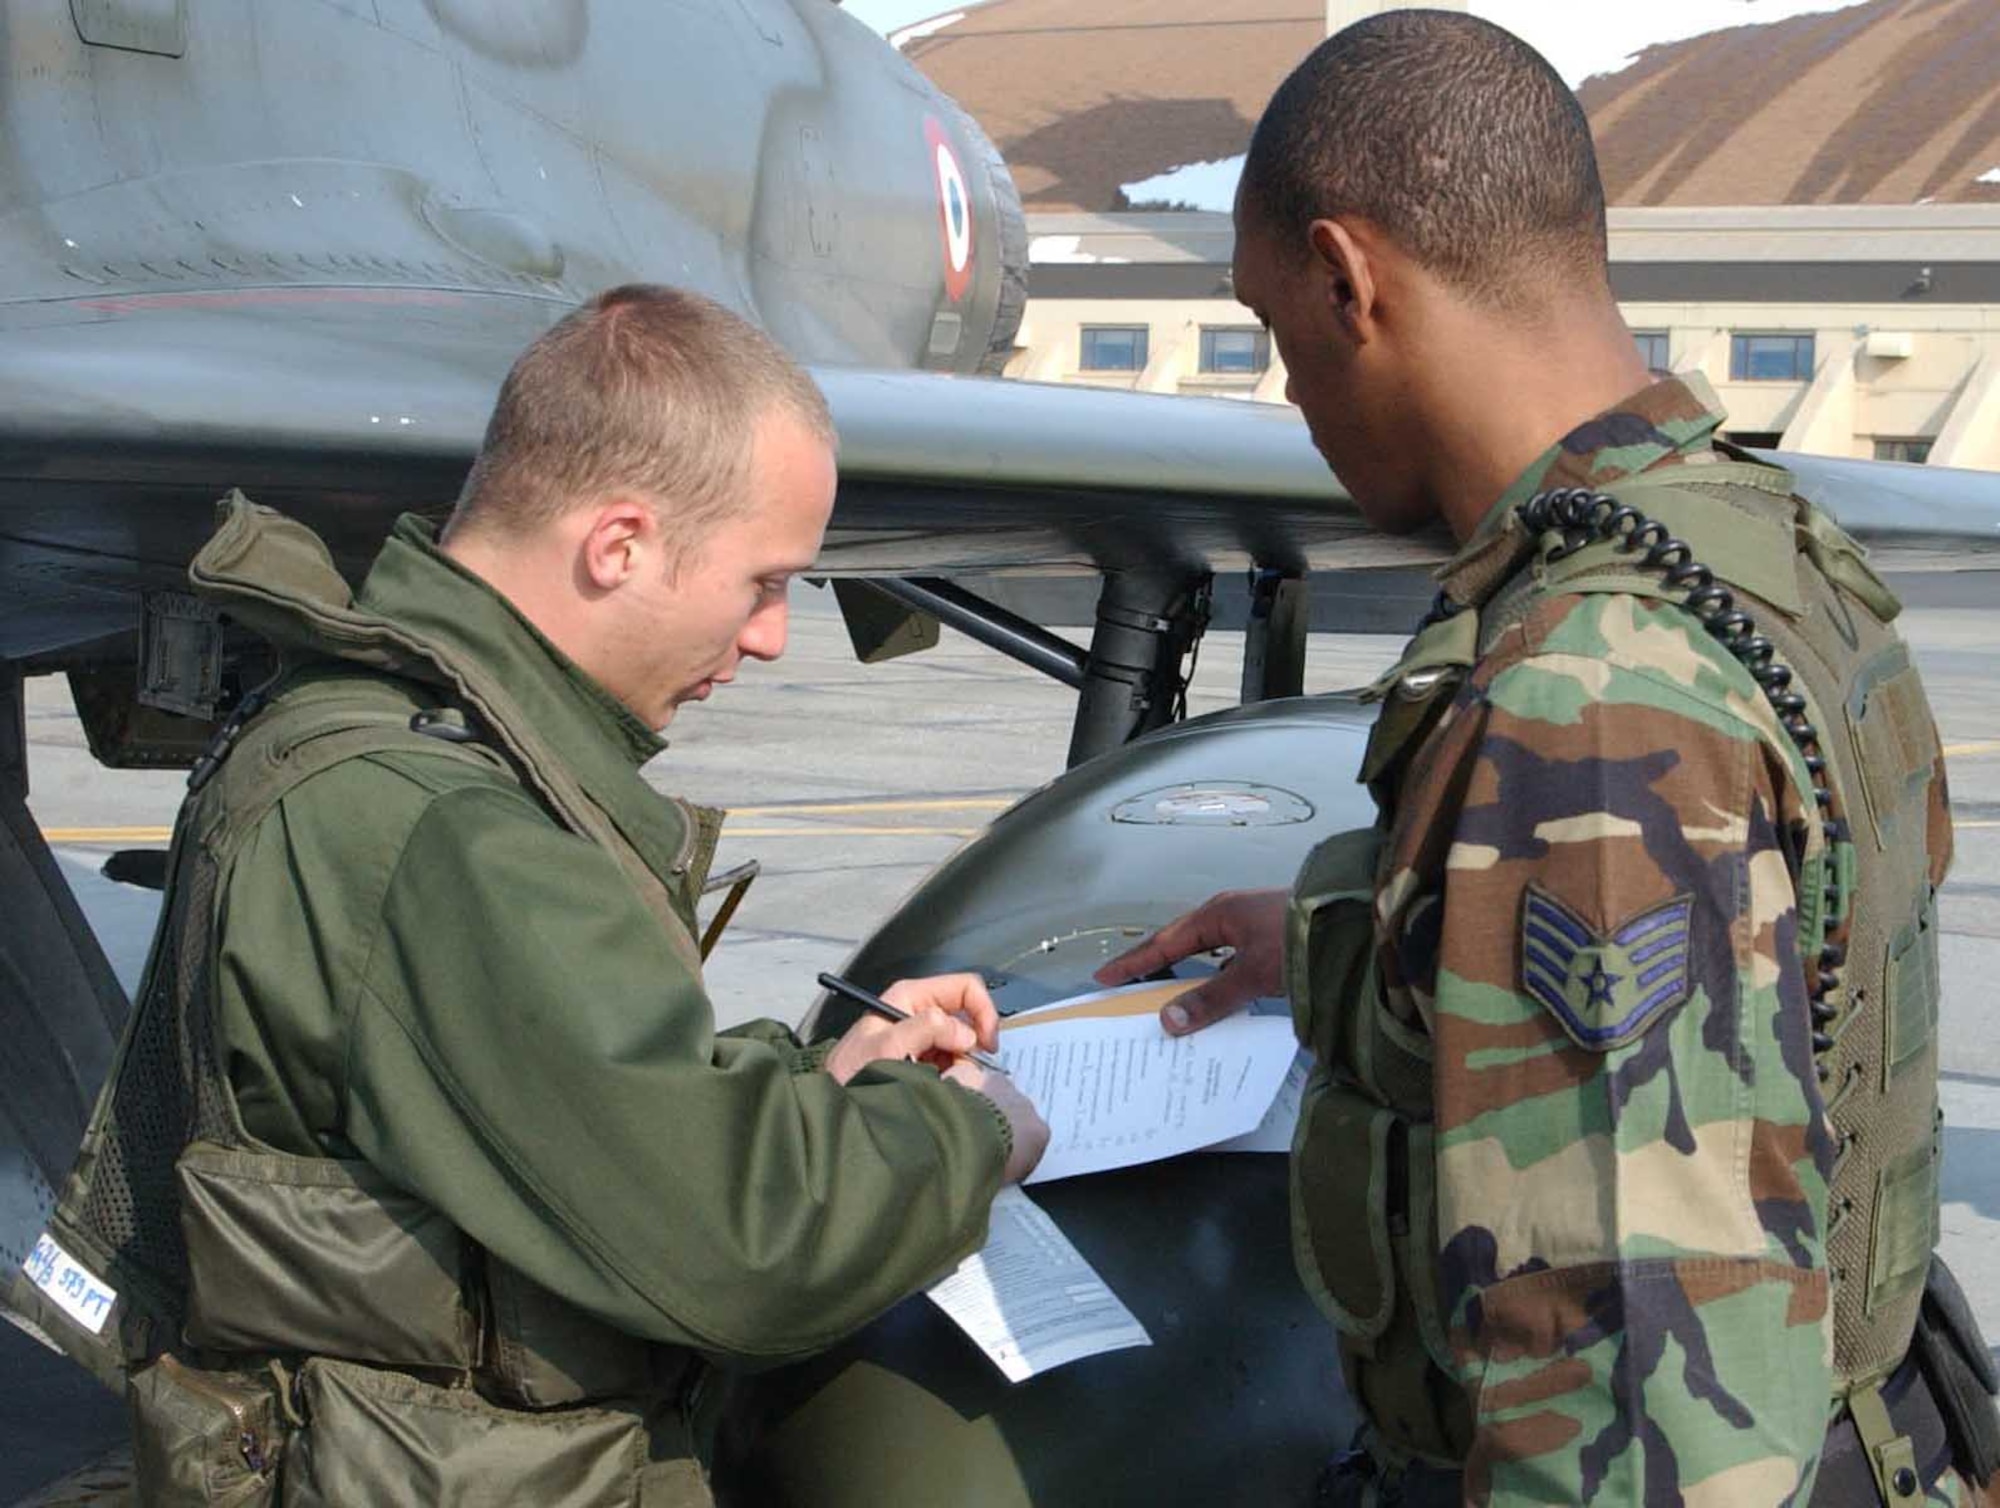 EIELSON AIR FORCE BASE, ALASKA -- Staff Sgt. Cedric Hughes, 354th Security Forces Squadron, helps 2nd Lt. Olivier Zemauli, a French Air Force pilot, with customs paperwork April 3 on the flightline. Security forces Airmen are certified to clear military aircraft and personel through customs when arriving at Eielson from another country. More than 1,300 air force personnel from the U.S., France and Australia are arriving in Alaska this week to take part in Red Flag-Alaska, a series of training exercises that include war games with allies and mock enemies. (U.S. Air Force photo by Senior Airman Justin Weaver).
